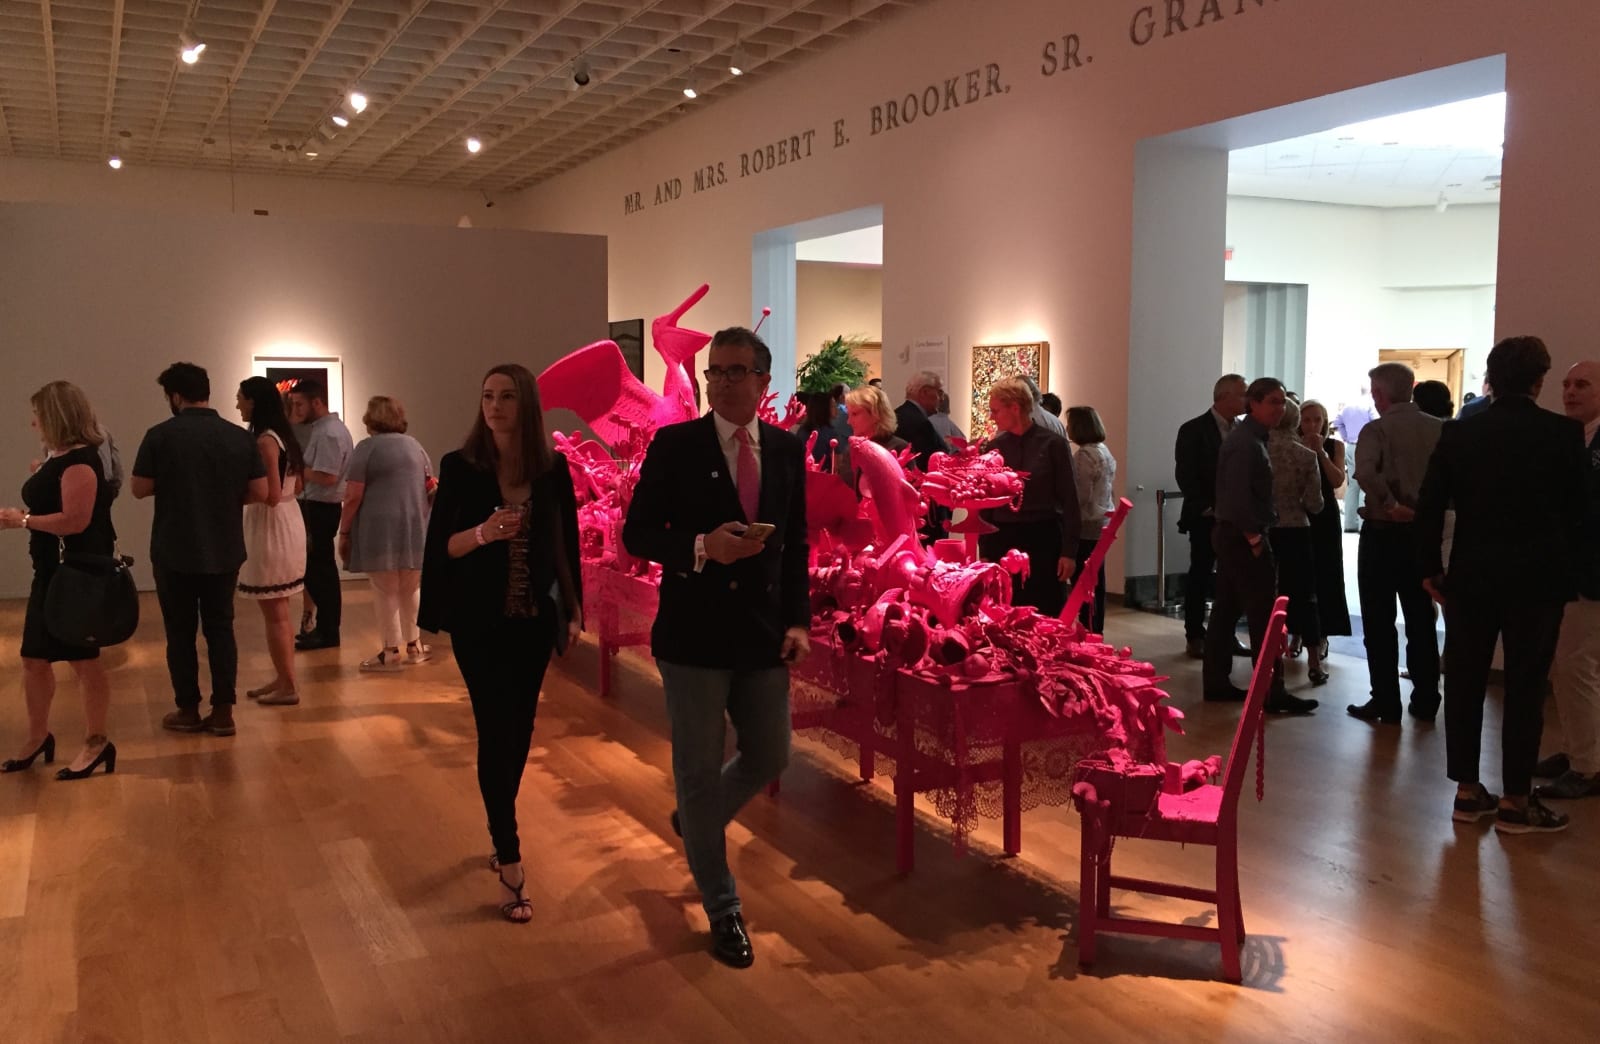 The 2018 Florida Prize in Contemporary Art